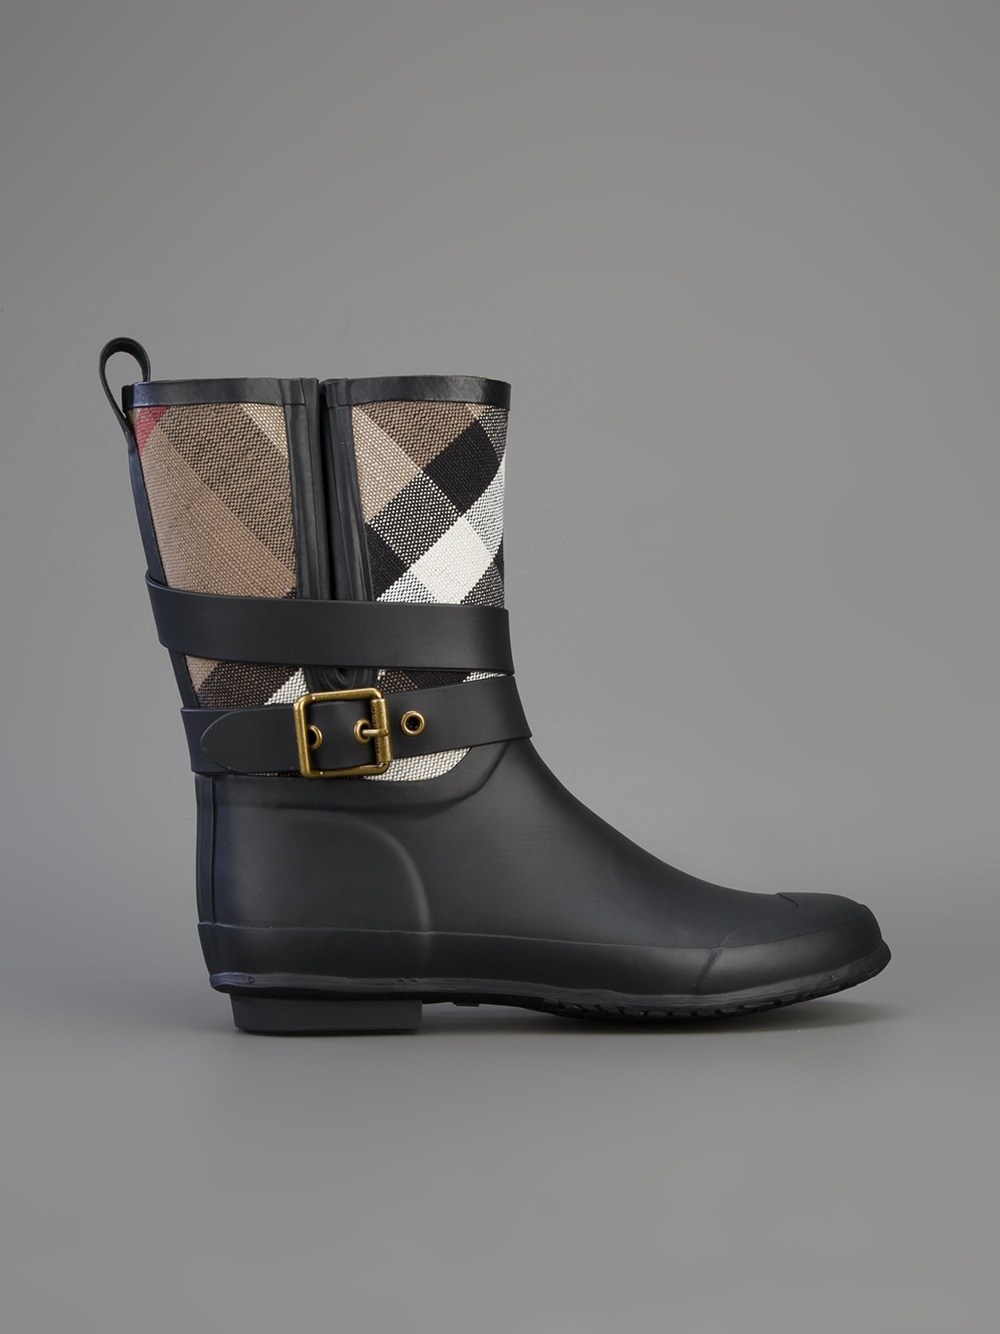 Lyst - Burberry Checked Rain Boot in Black